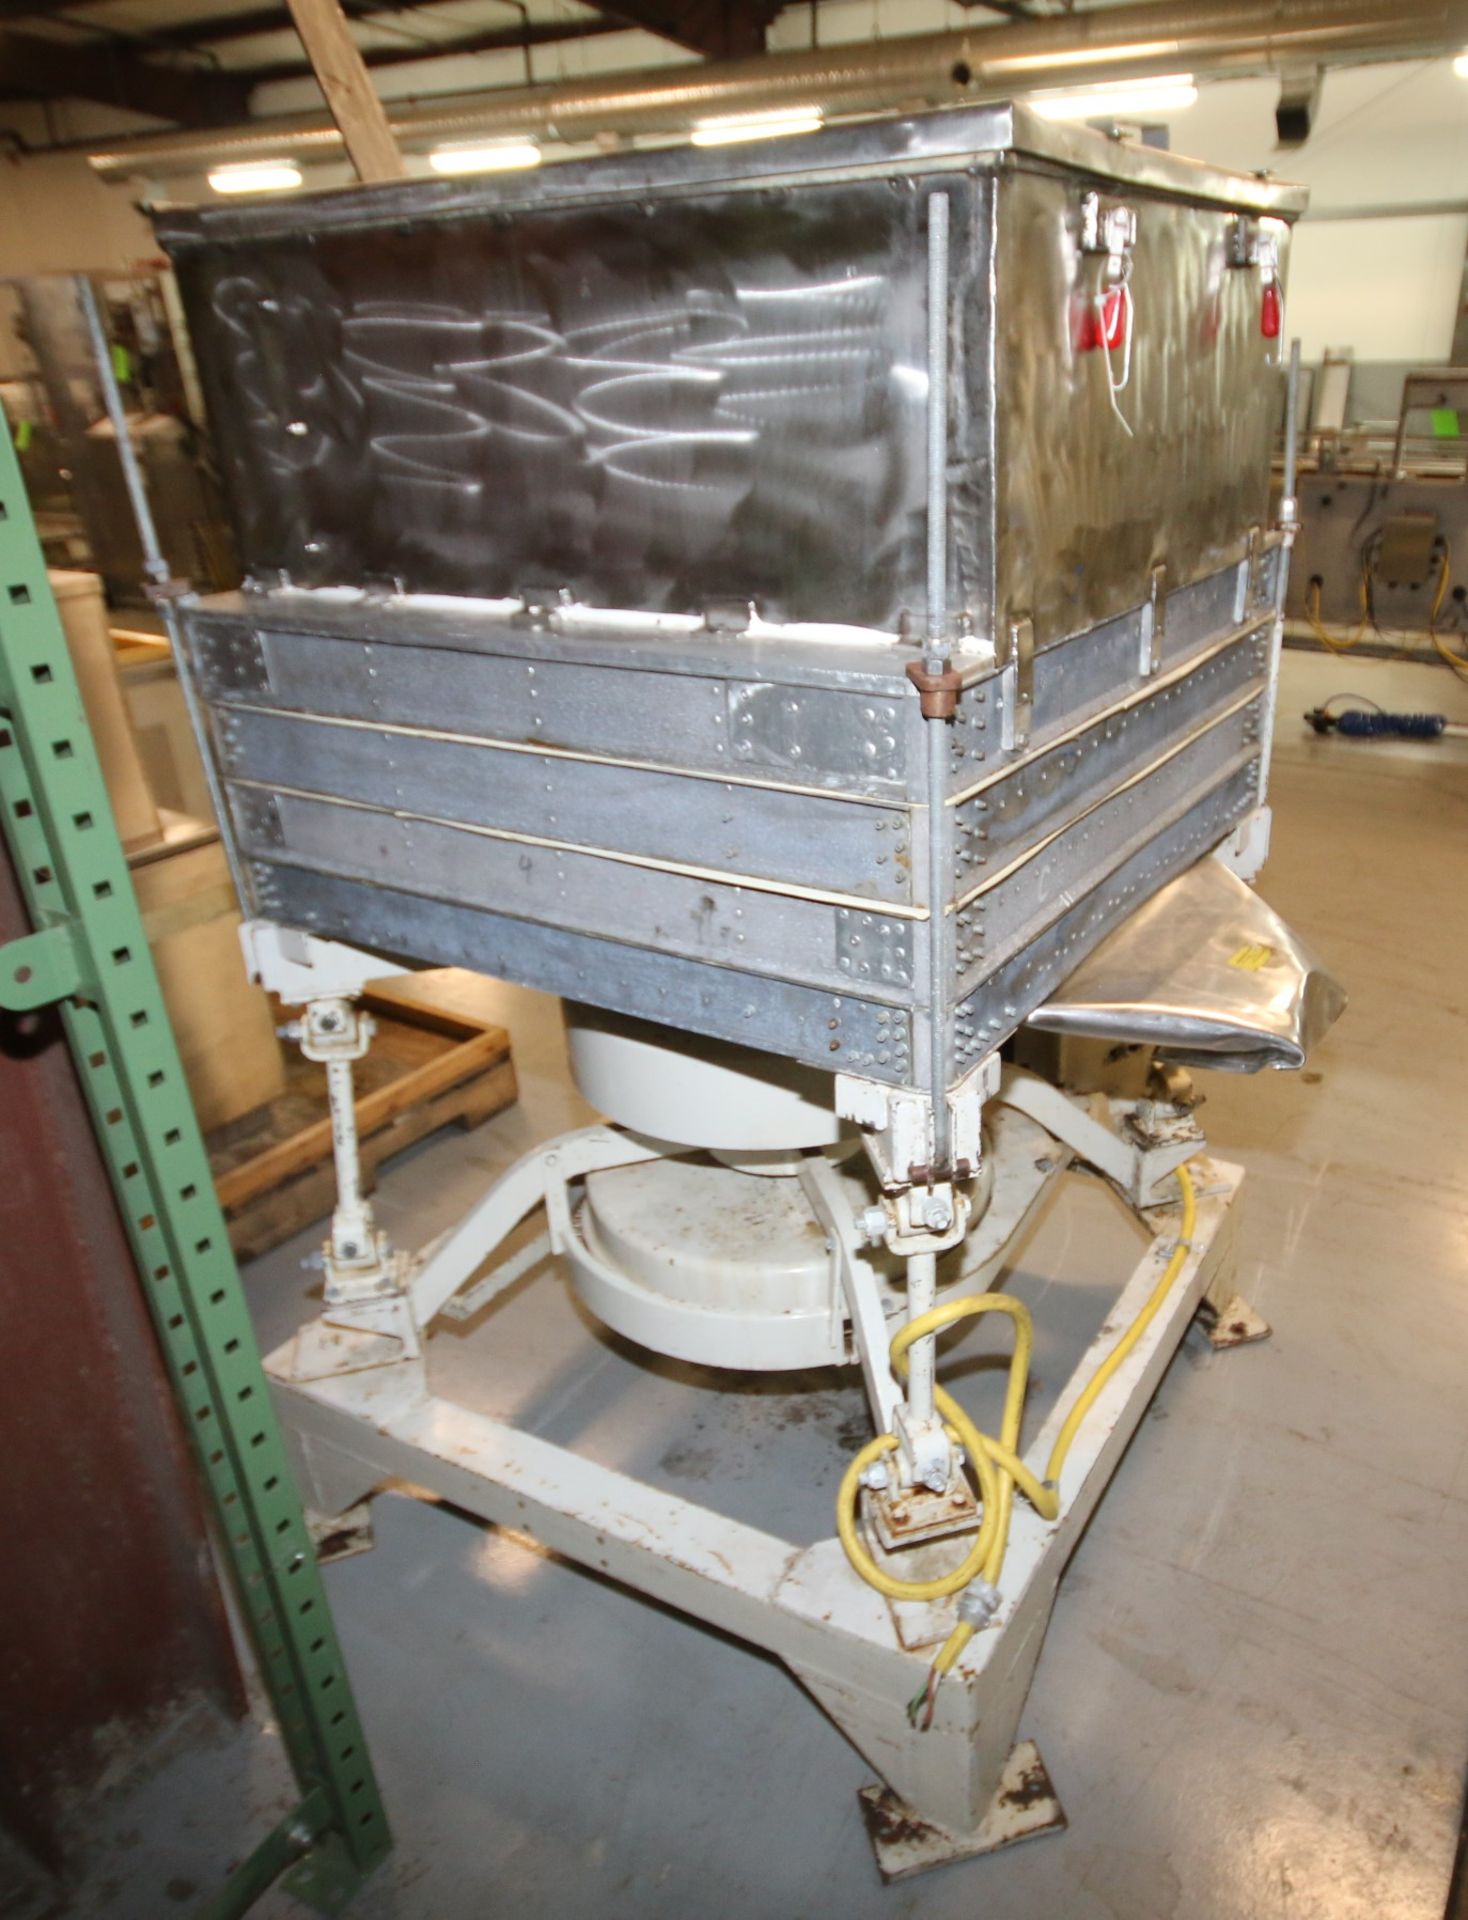 Ferrell - Ross 36" x 28" Gyratory Screen / Retangular Sifter, Size CS1, SN 4830, with 2 Section - Image 4 of 6